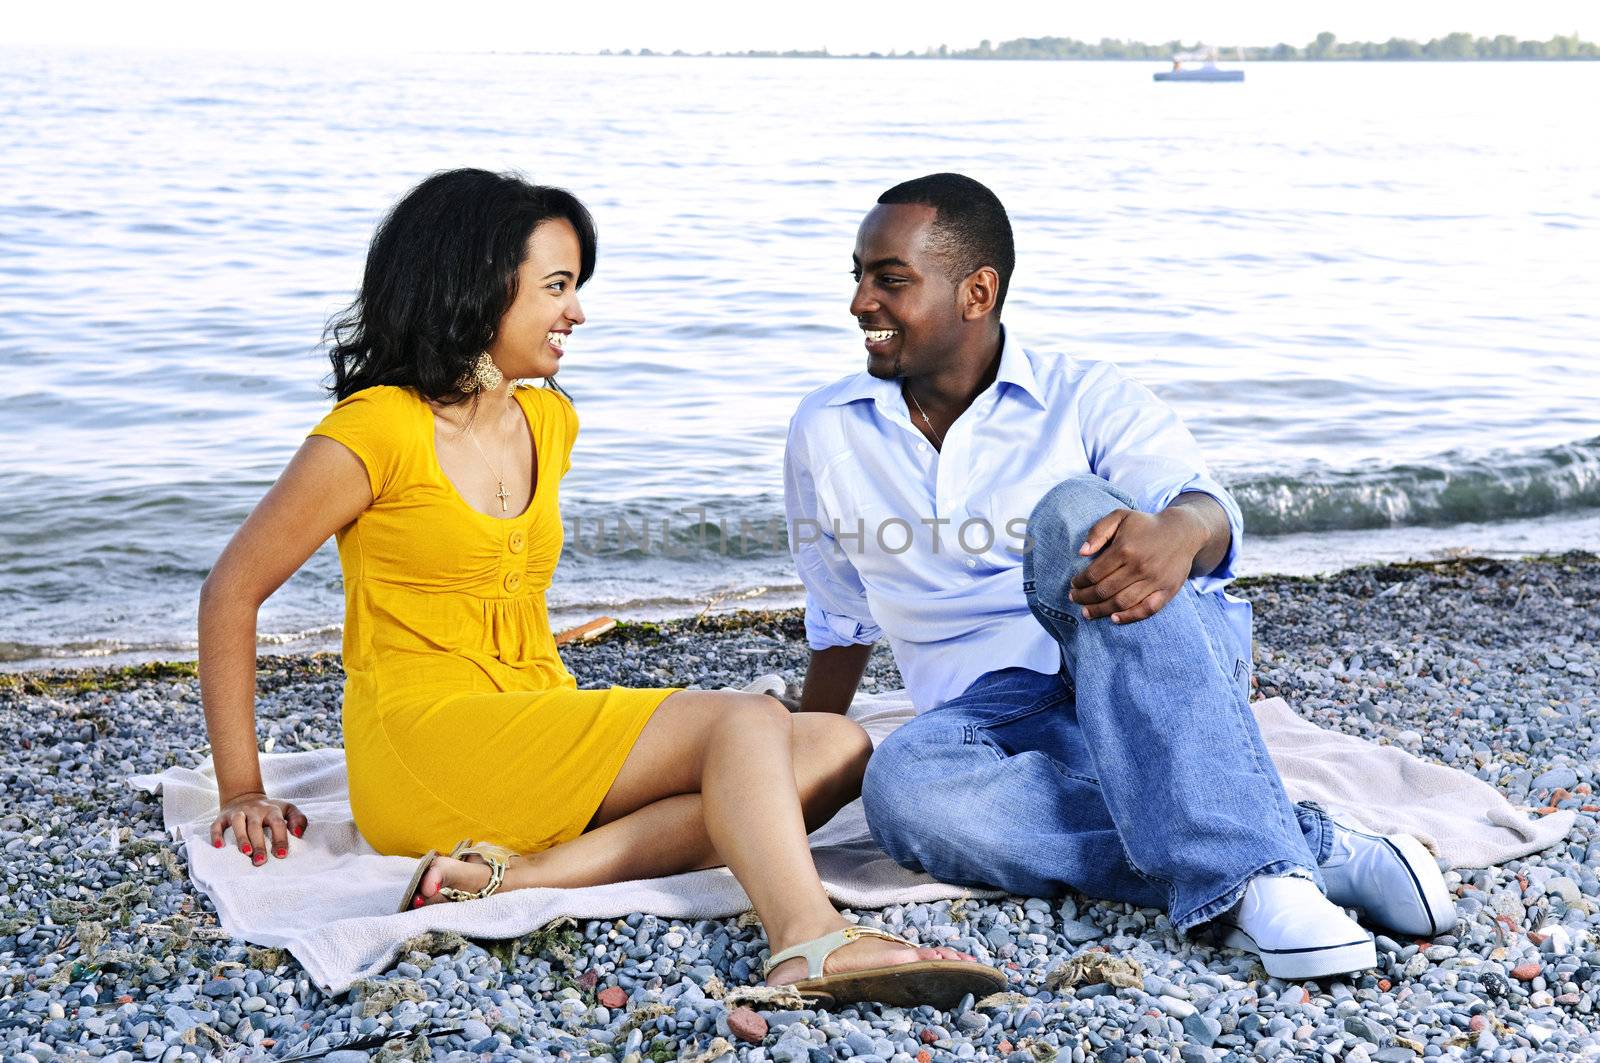 Young romantic couple looking at each other sitting on beach